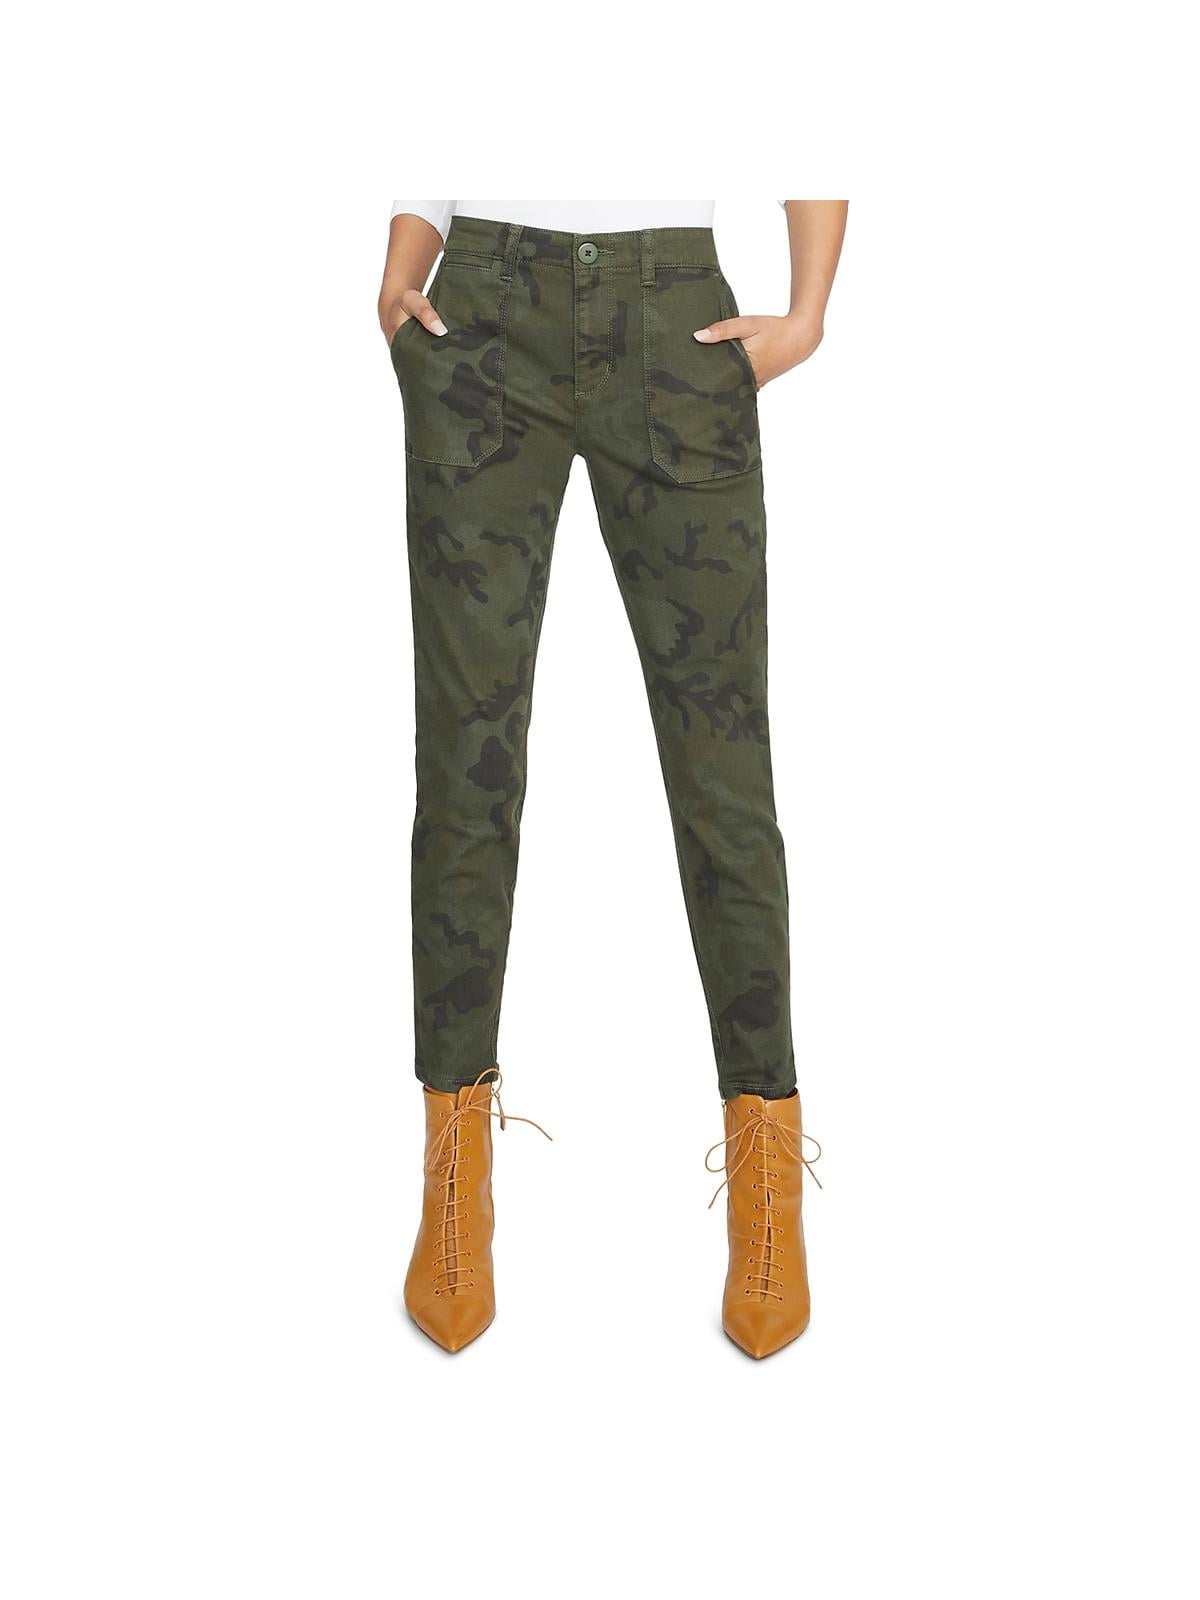 Cargo Trousers & Pants - 38 - Women - 4 products | FASHIOLA INDIA